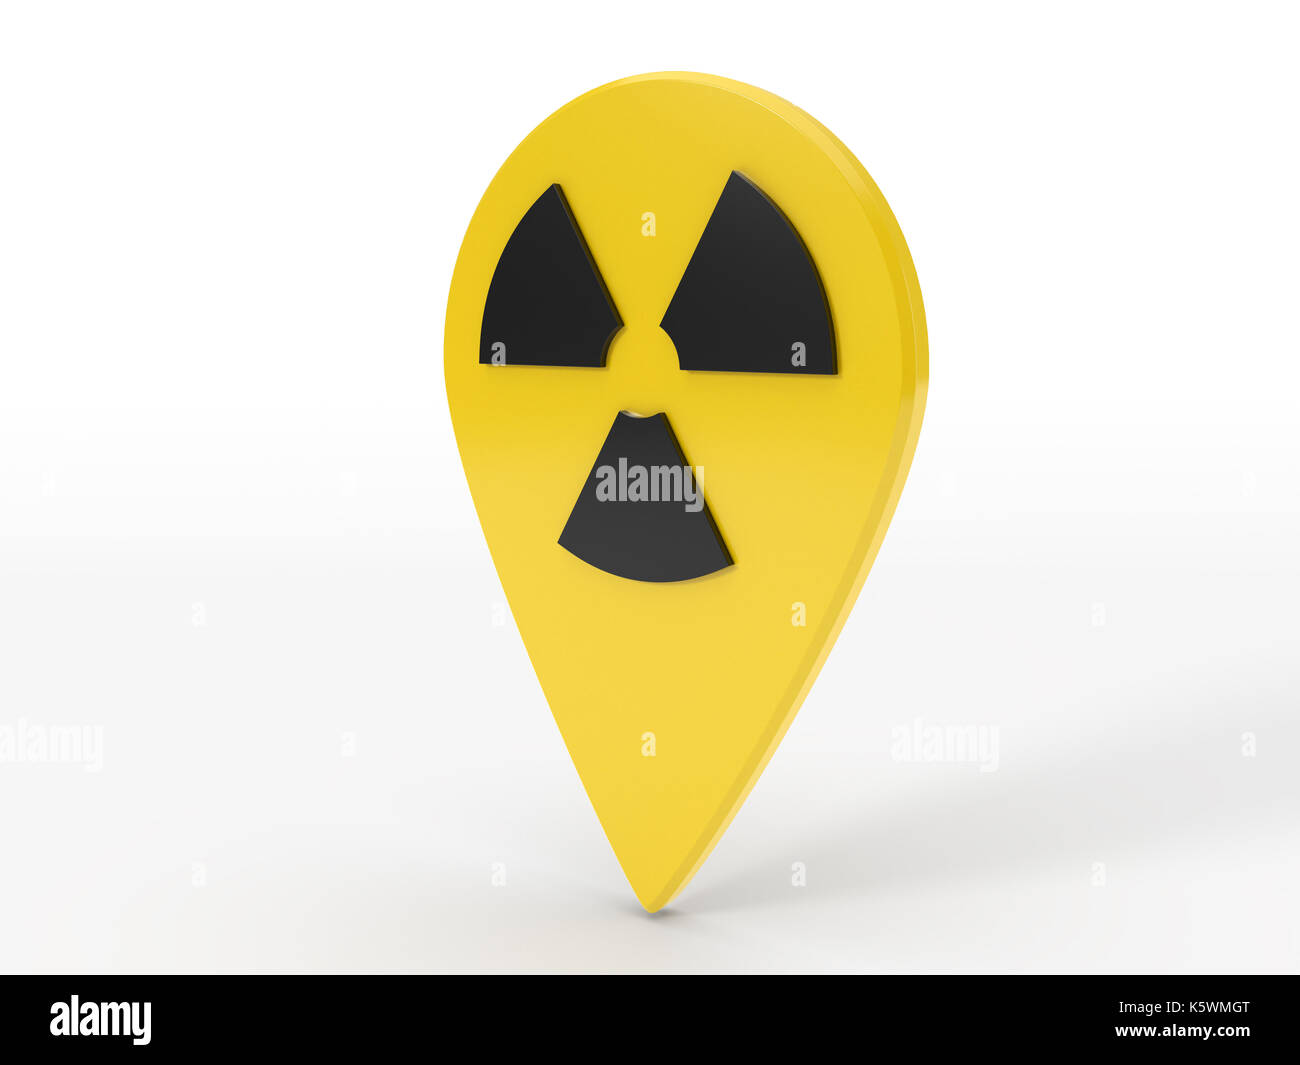 simple design of map locator pin with nuclear symbol. isolated on white. Stock Photo